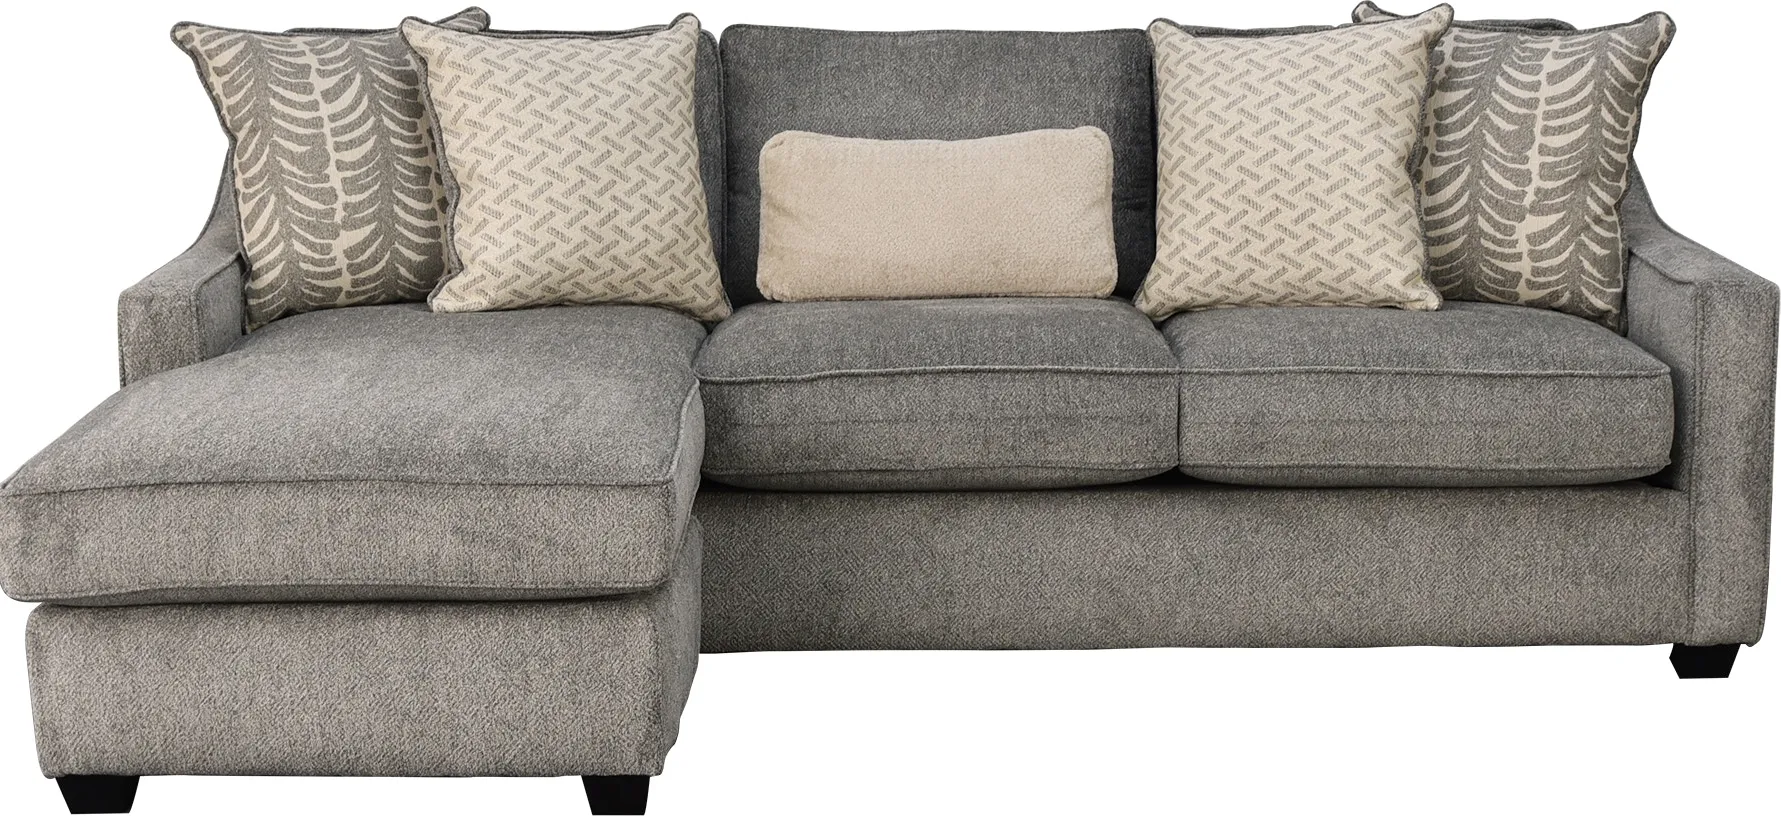 Behold ST. CHARLES SOFA/CHAISE